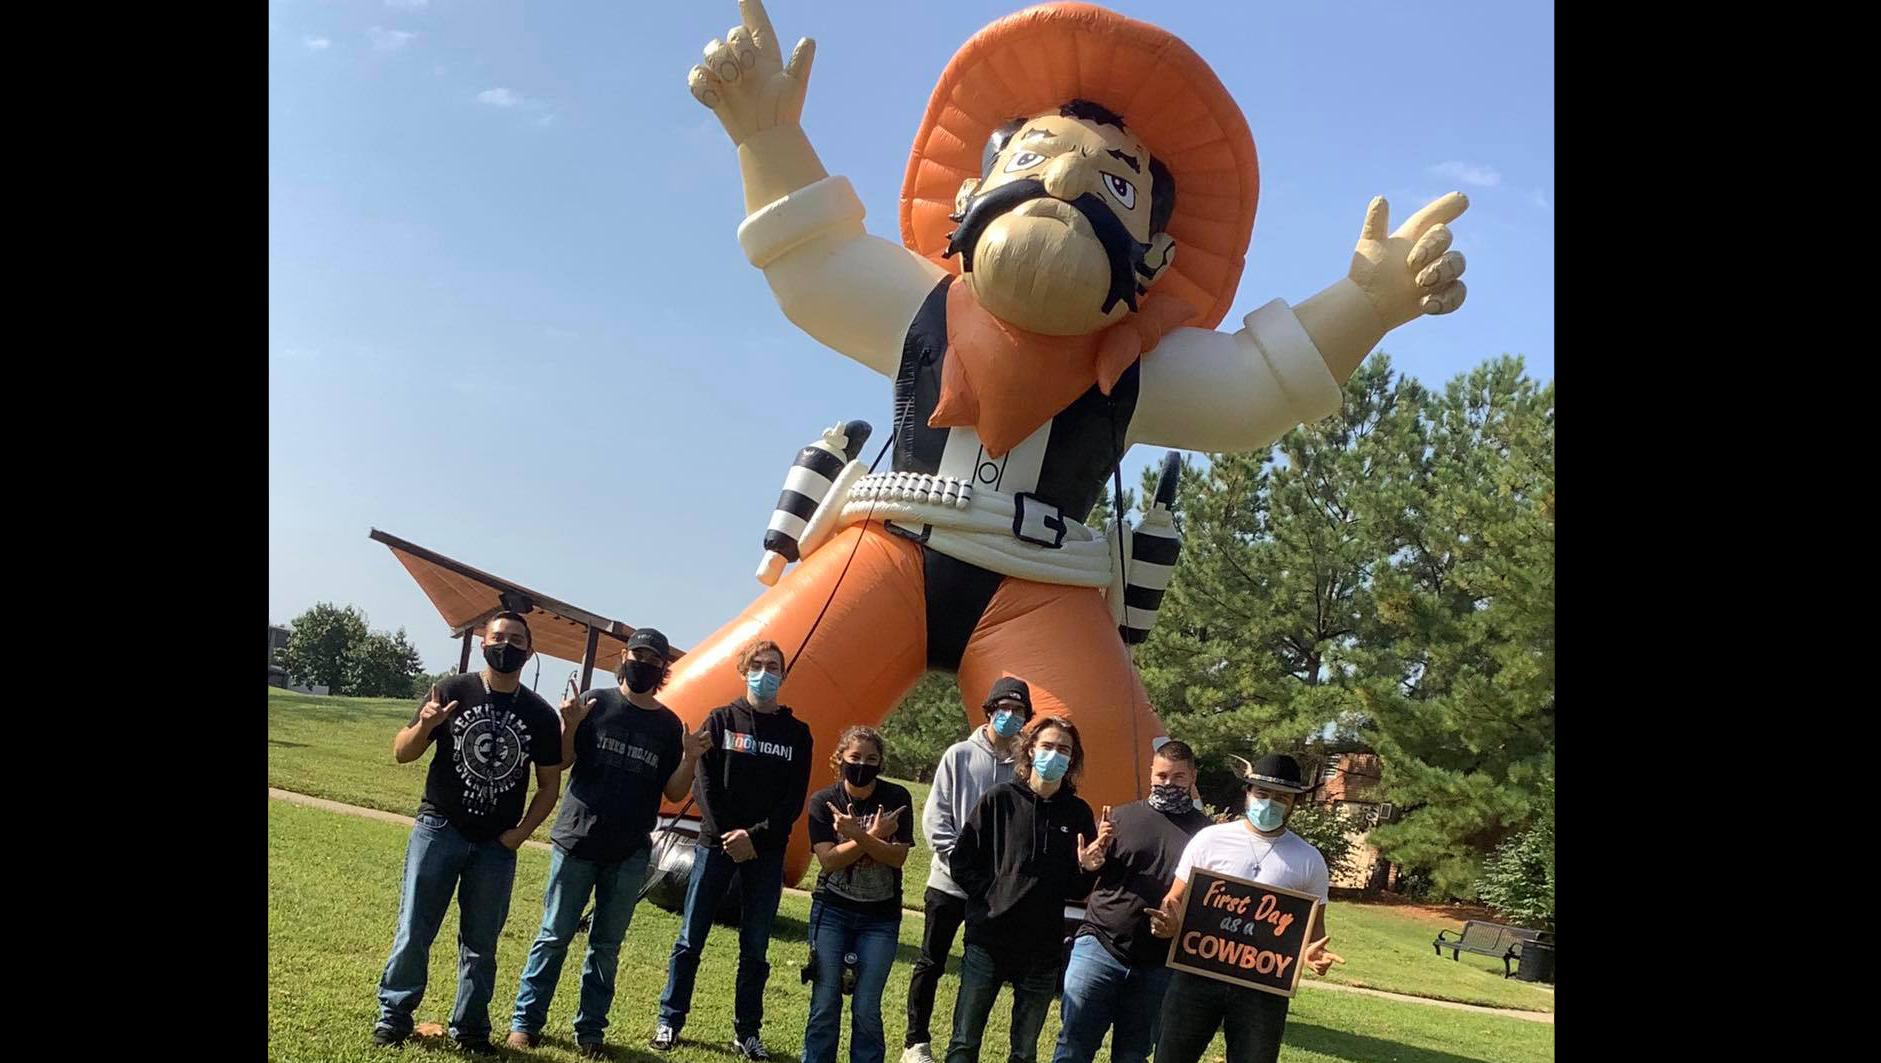 Pistol Pete welcomed students to the OSUIT campus for the first day of the fall semester.